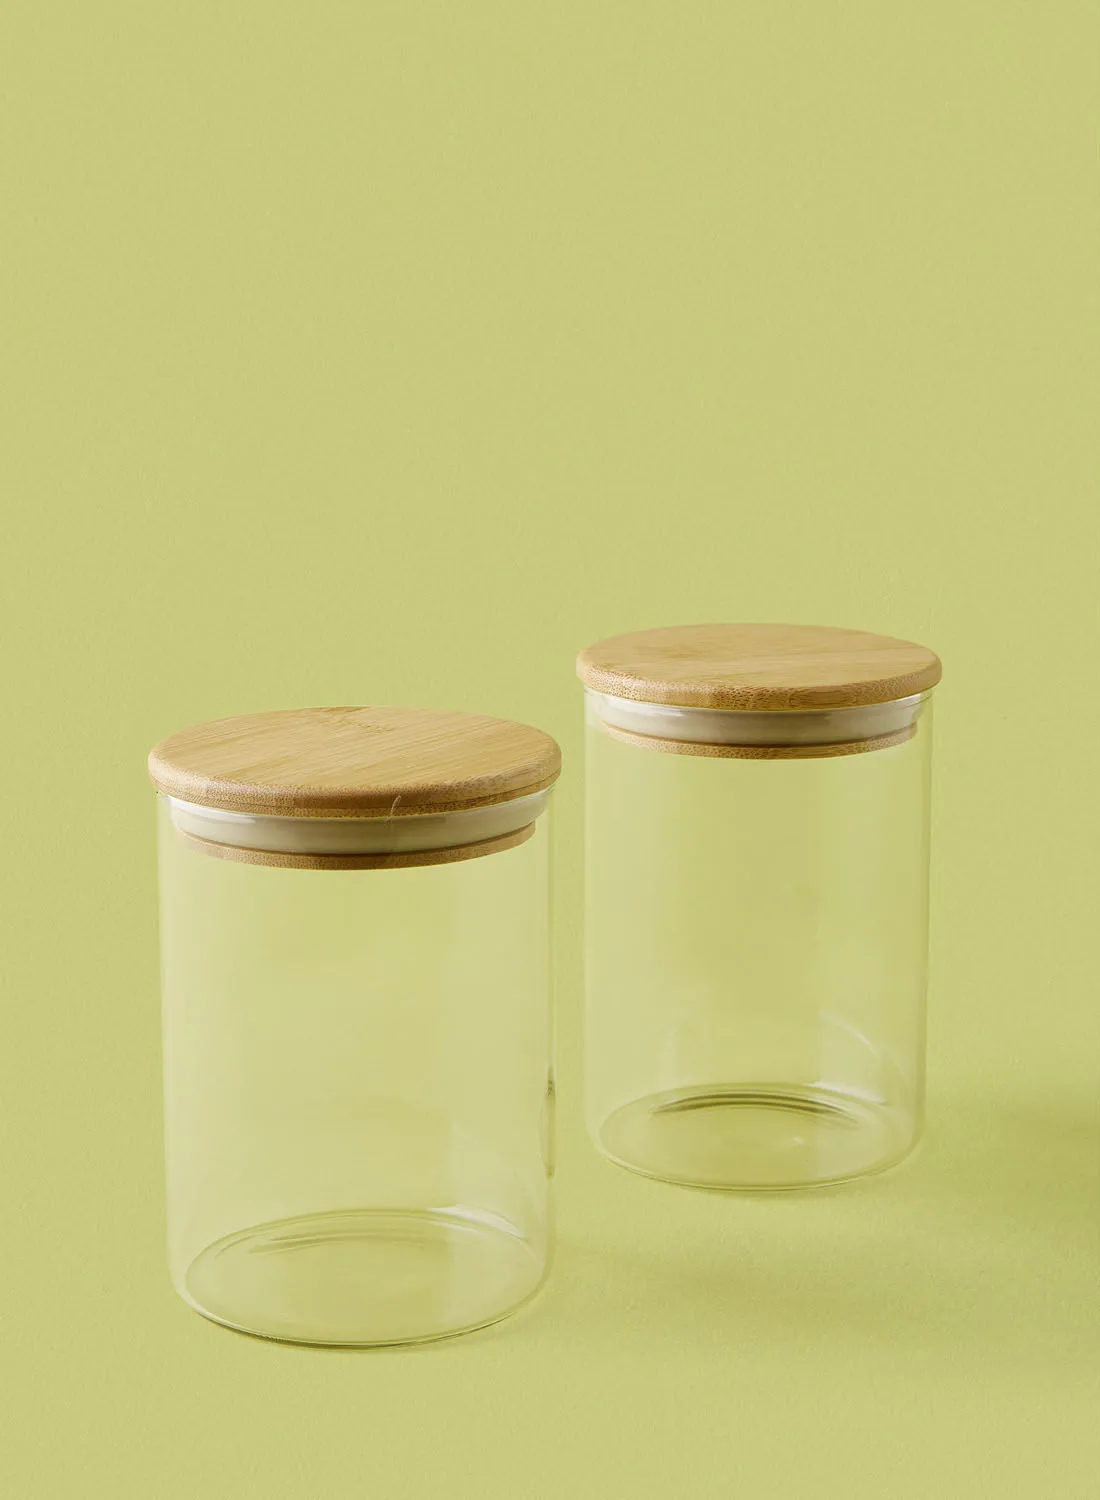 Noon East 2 Piece Glass Food Storage Container Set - 700 ml Each - Airtight Bamboo Lids - Food Storage Box - Storage Boxes - Kitchen Cabinet Organizers - Glass Food Container - Clear Clear 2-Piece - 700ml